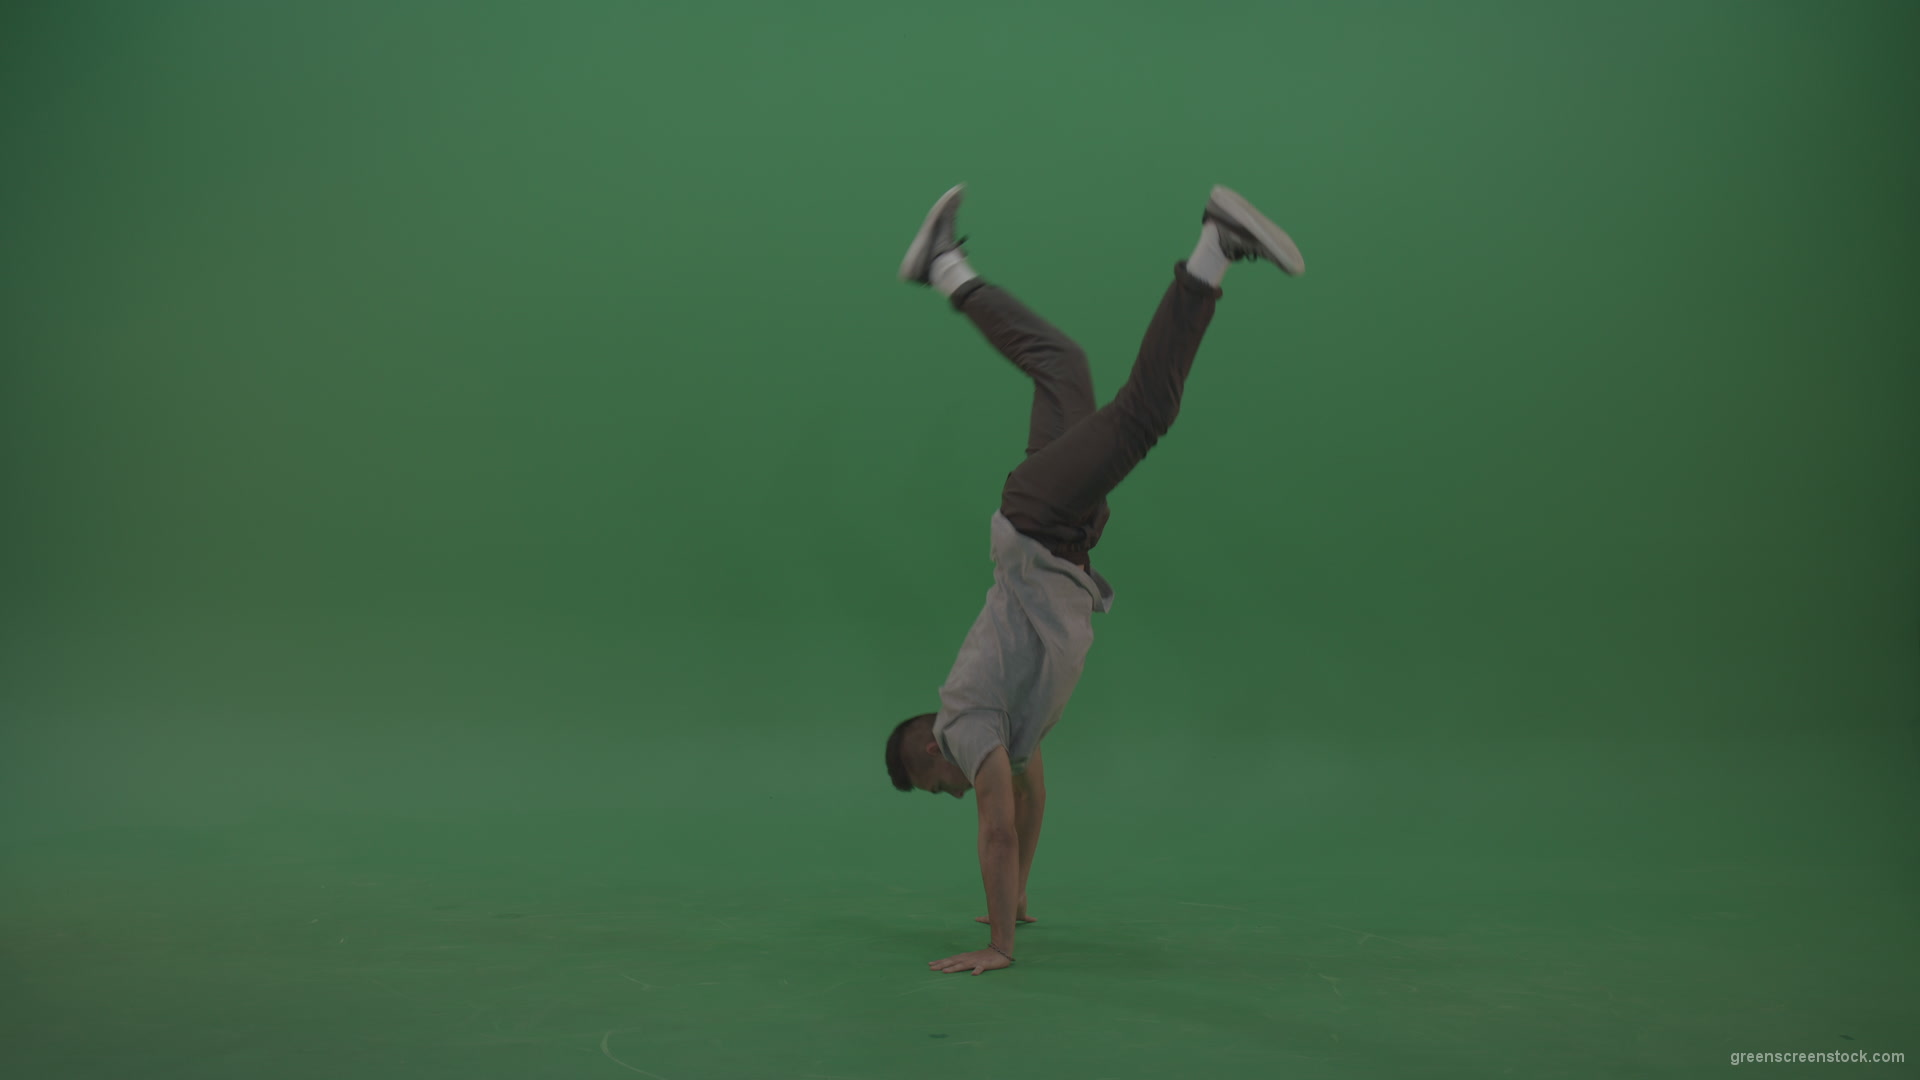 Man-dancing-and-staying-on-hand-on-the-green-floor-green-screen_002 Green Screen Stock